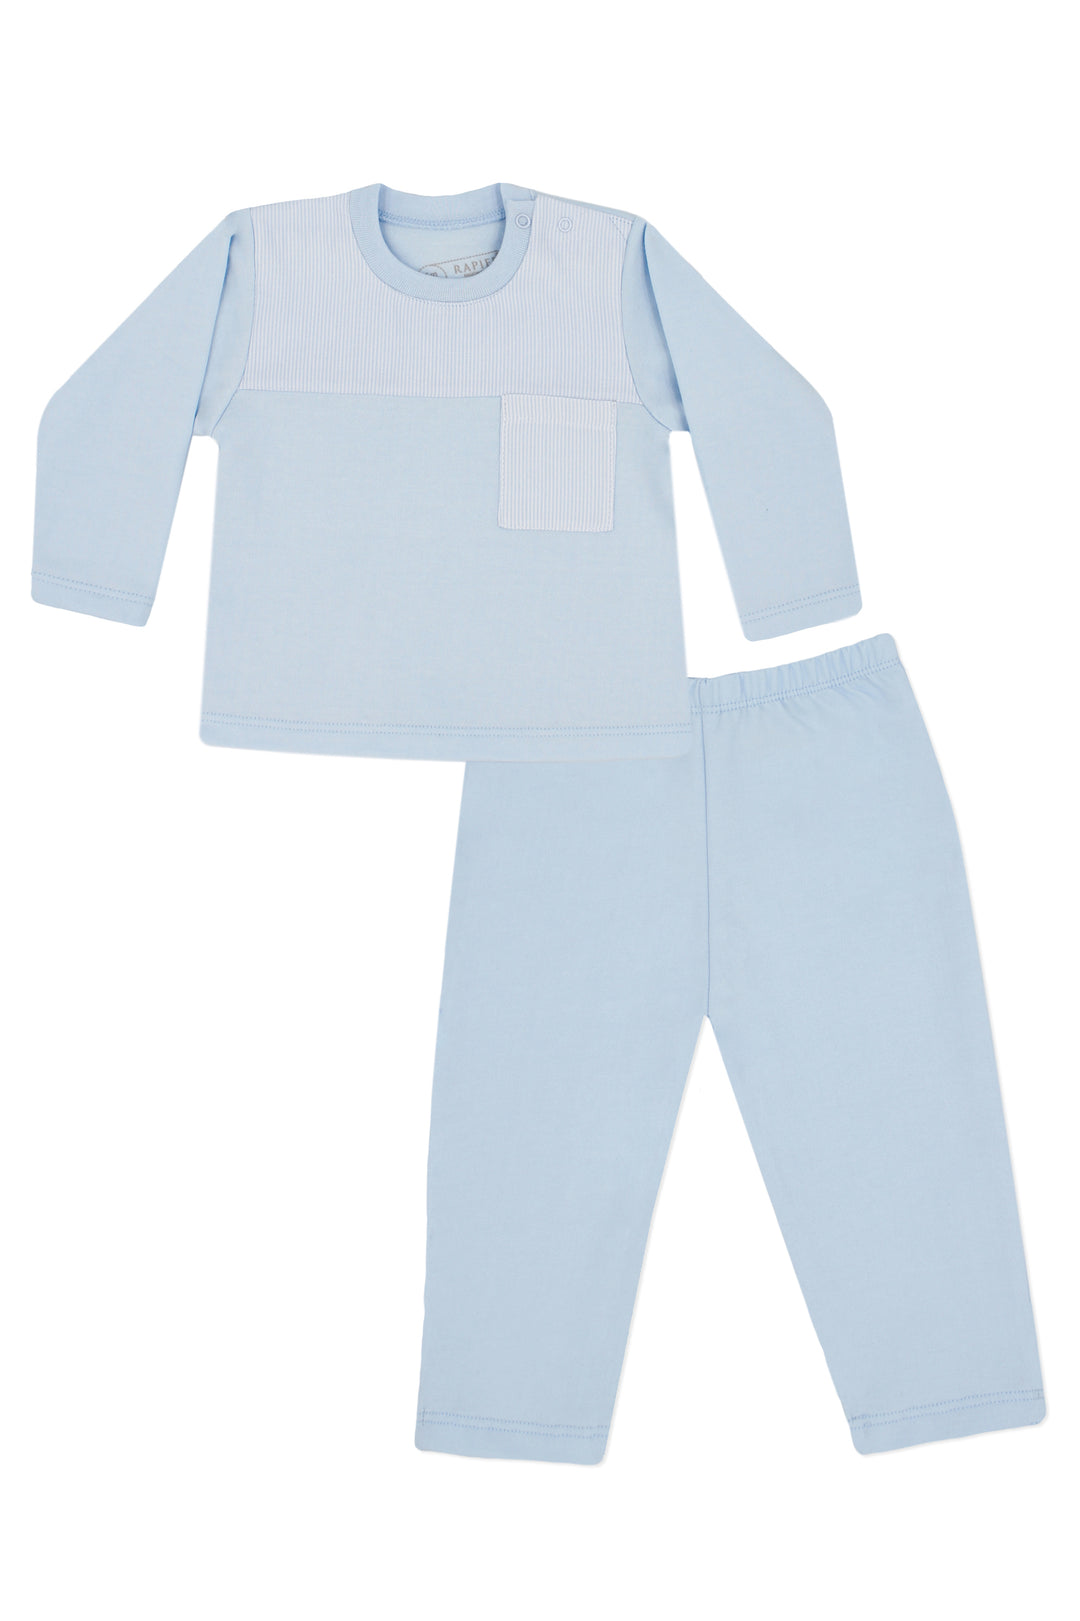 Rapife "Atticus" Blue Striped Tracksuit | iphoneandroidapplications